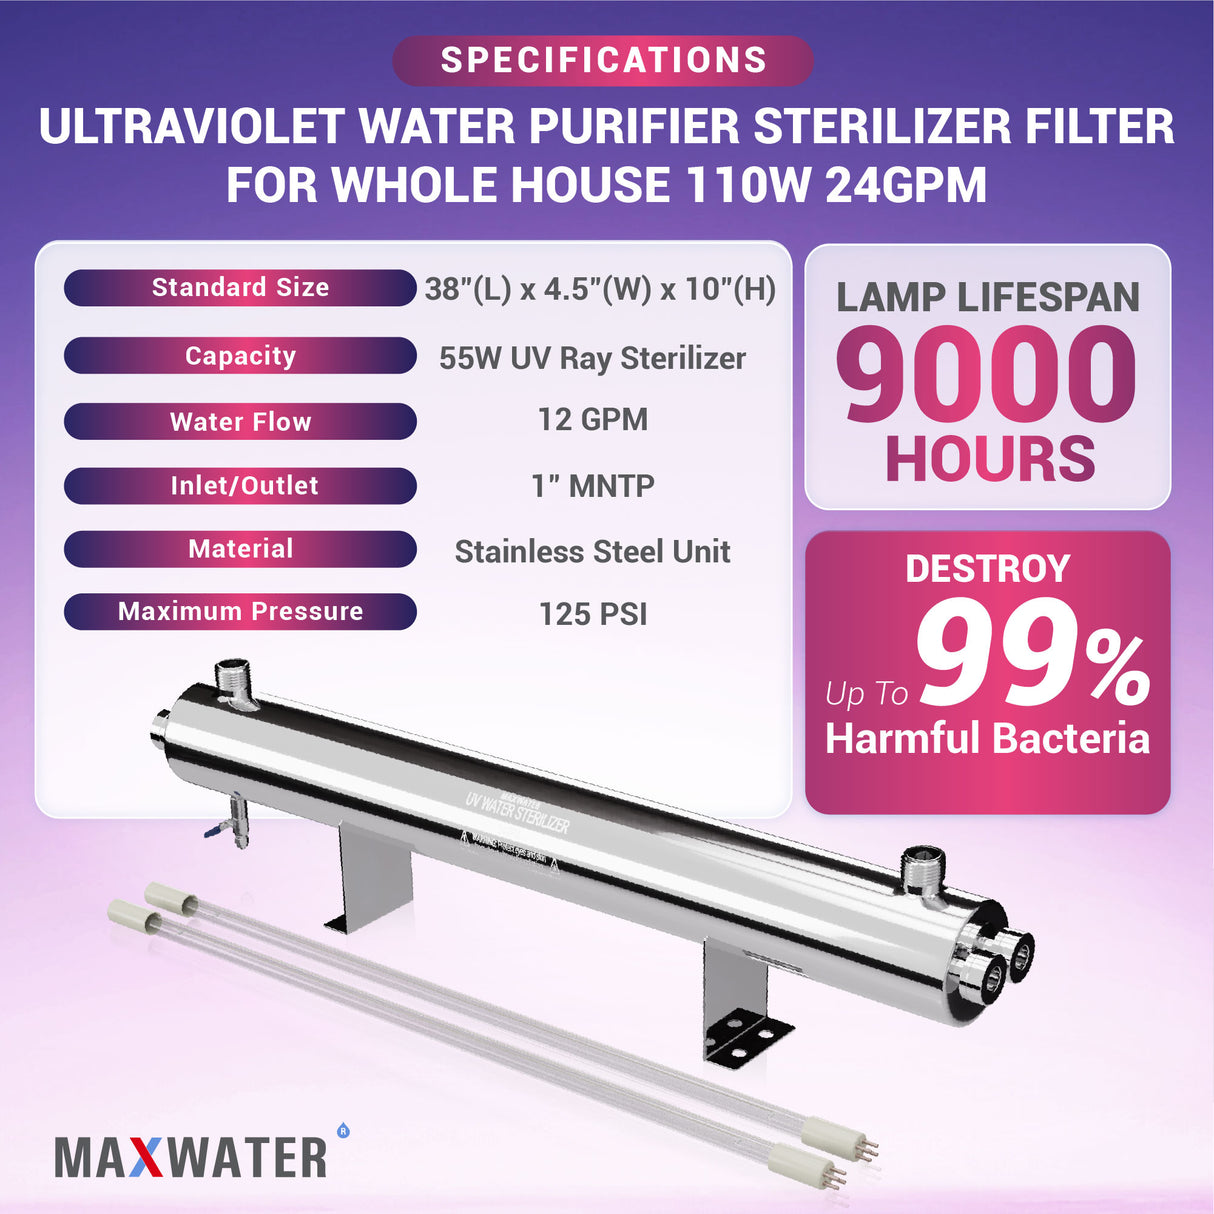 UV Light Water Filter Sterilizer, 110W, 24GPM - 1" Inlet/Outlet, Light and Audio Alarm Ballast